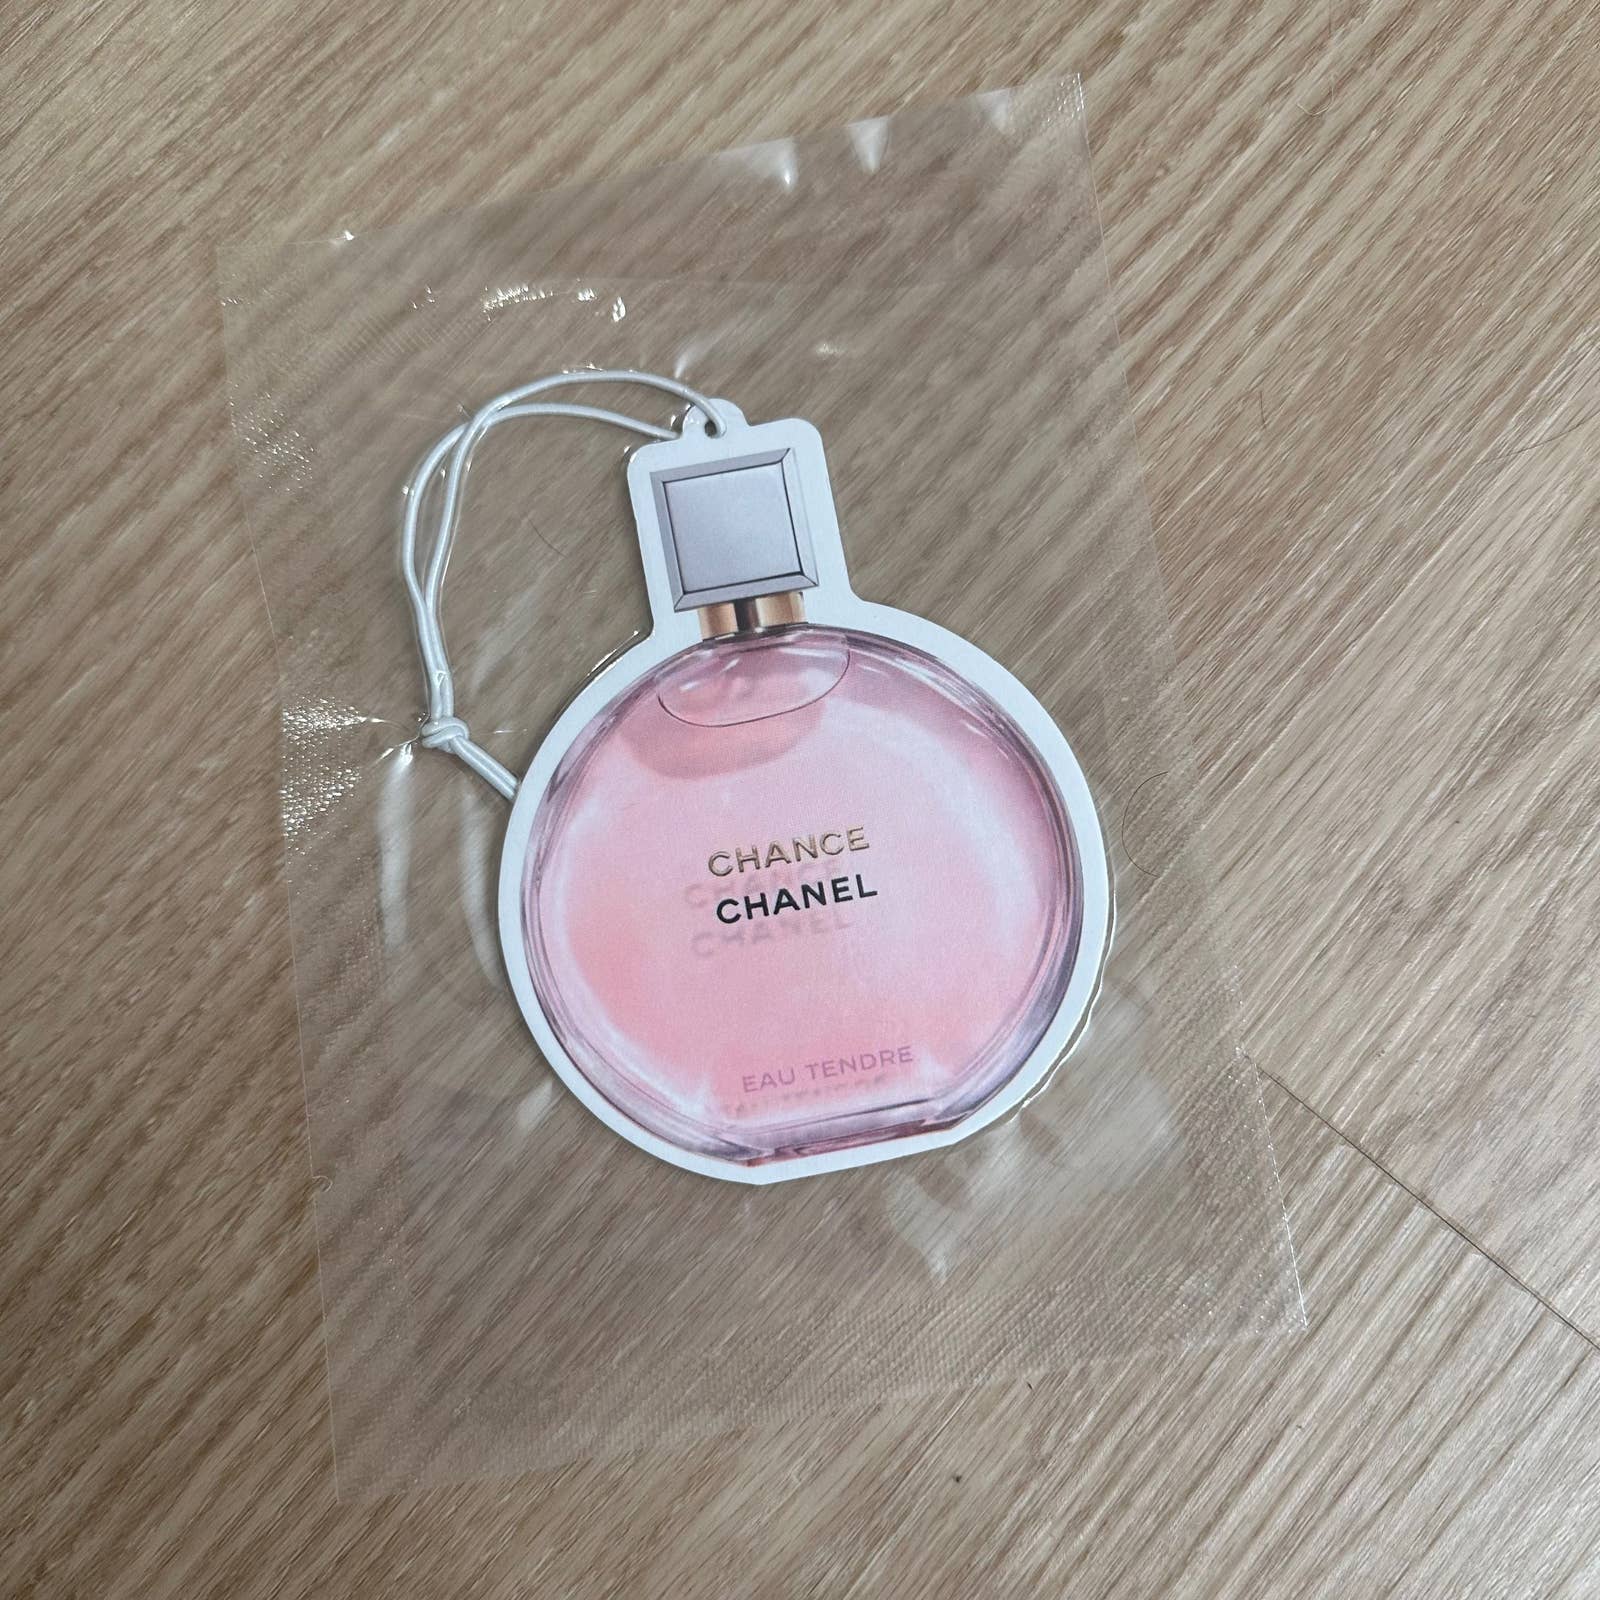 Chanel Chance Eau Tendre Review: A Delightfully Fragrant Scent - Luxury Of  Self Care